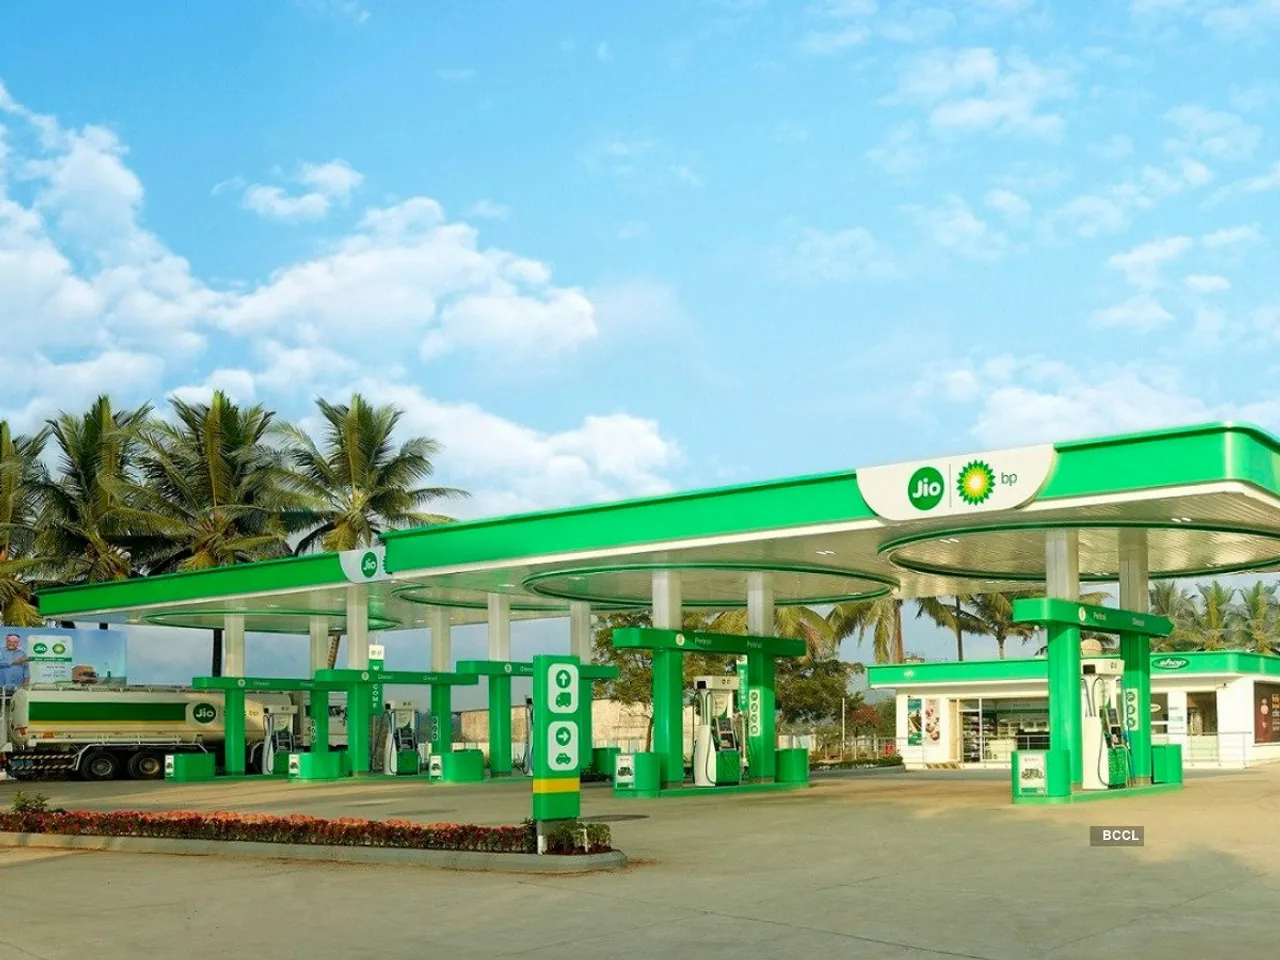 Reliance-bp seeks USD 11 per mmBtu for more gas from KG-D6